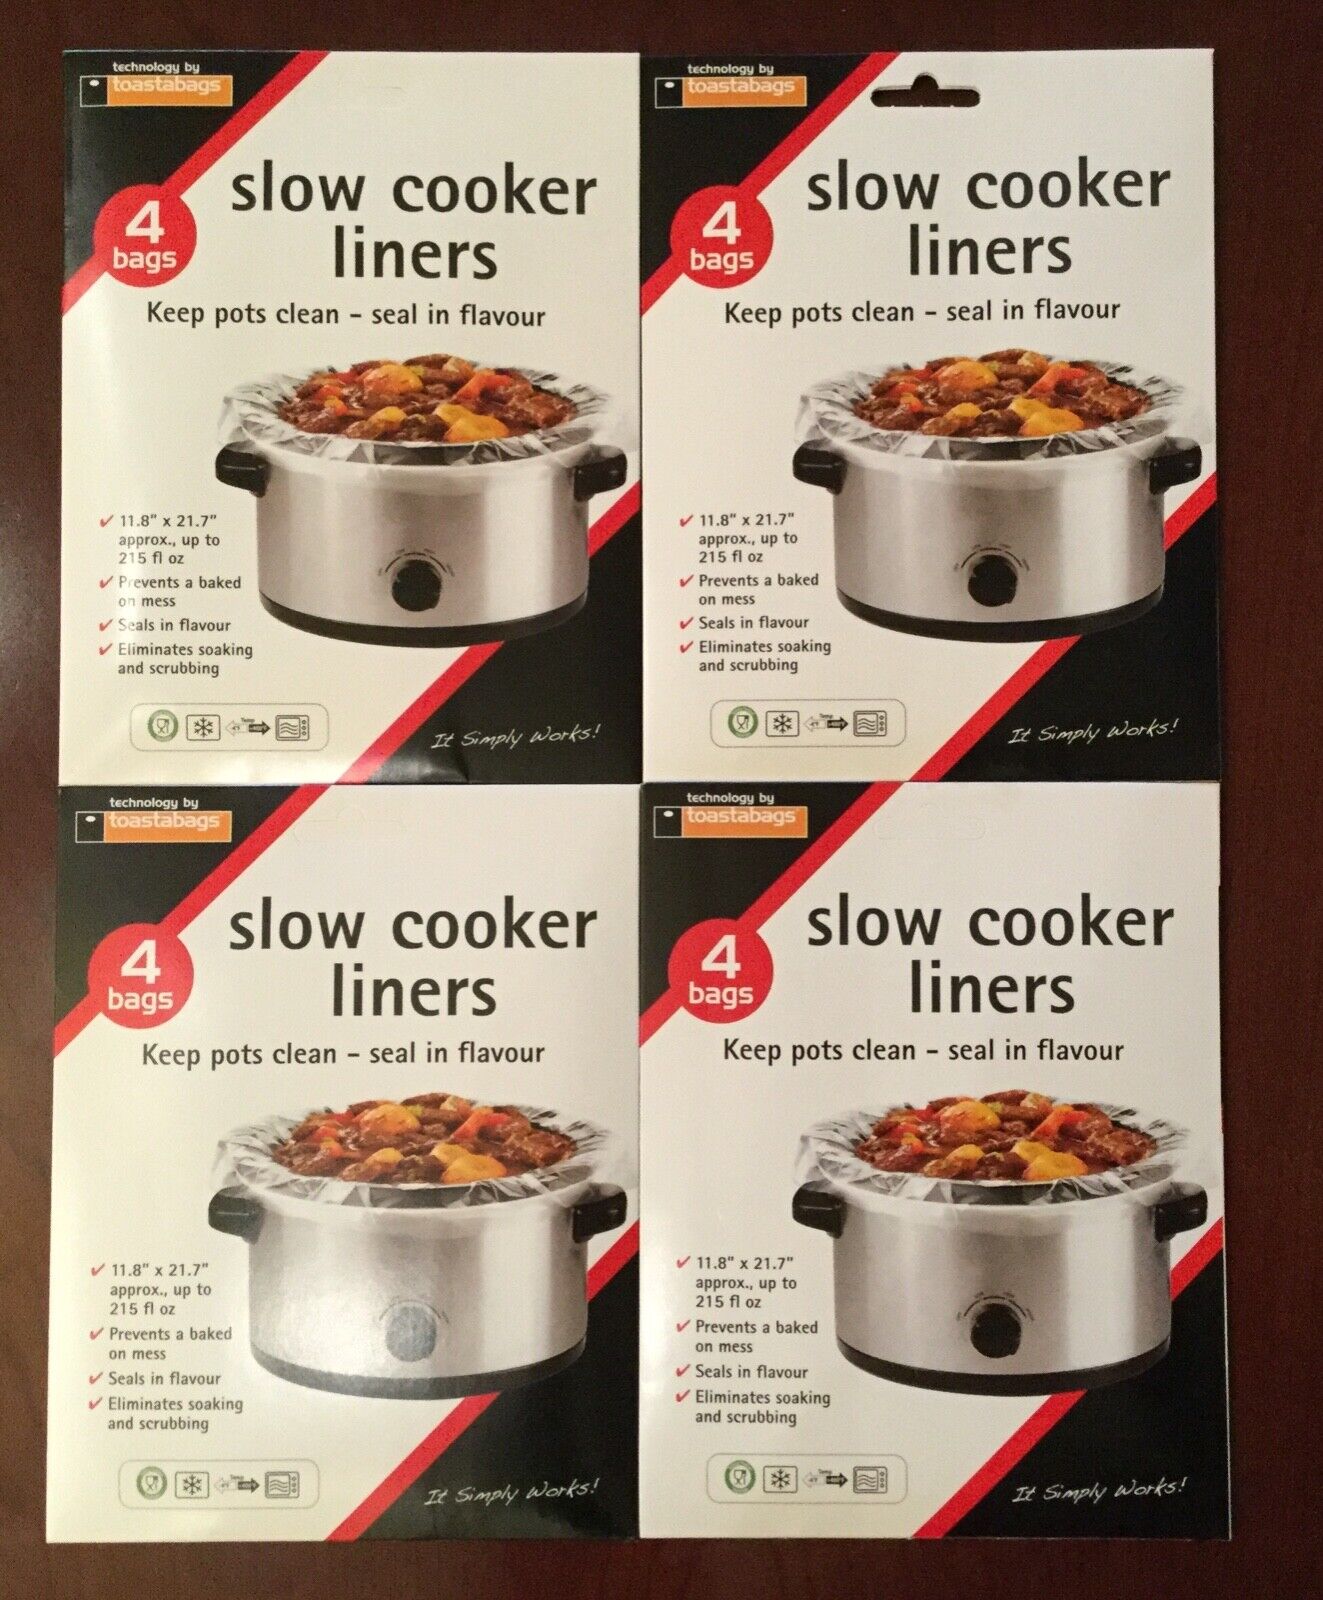 16 Toastabags Crock Pot Slow Cooker Liners bags 11.8” x 21